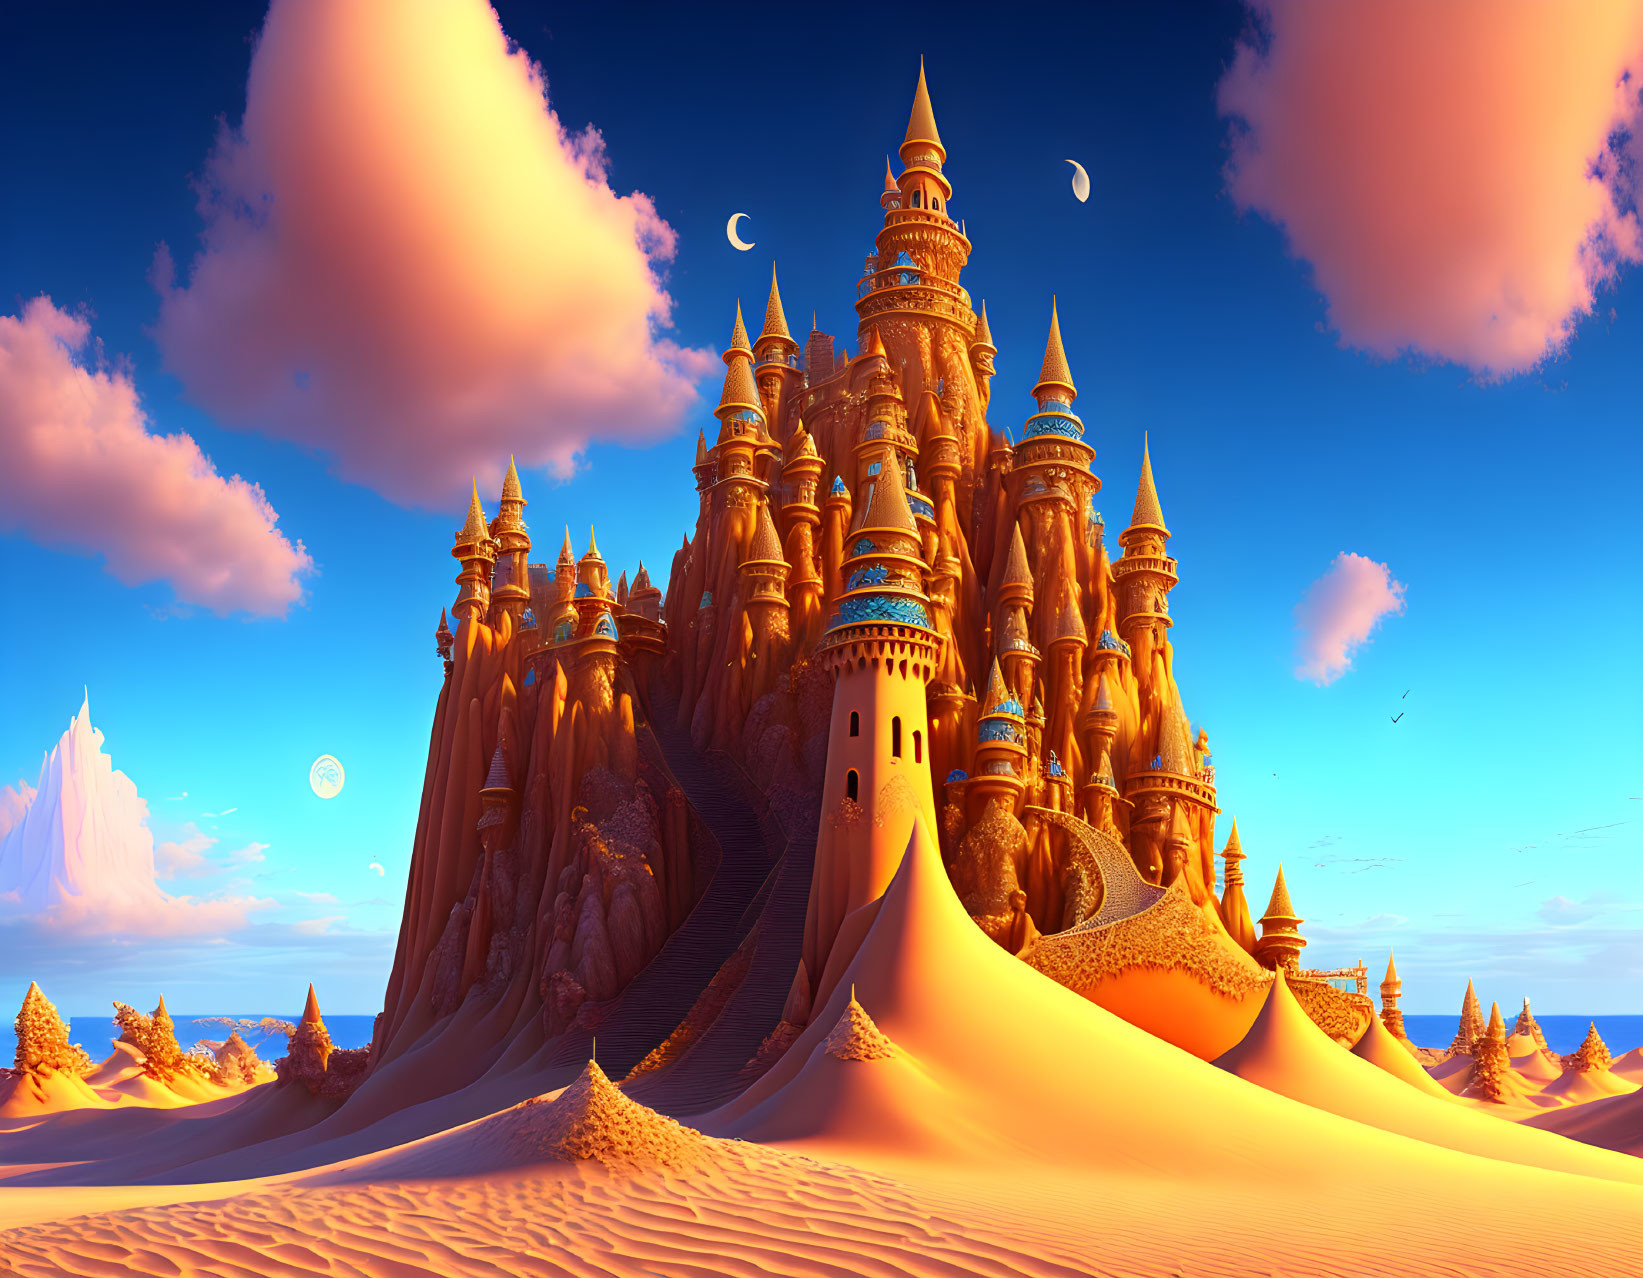 Castles Made Of Sand